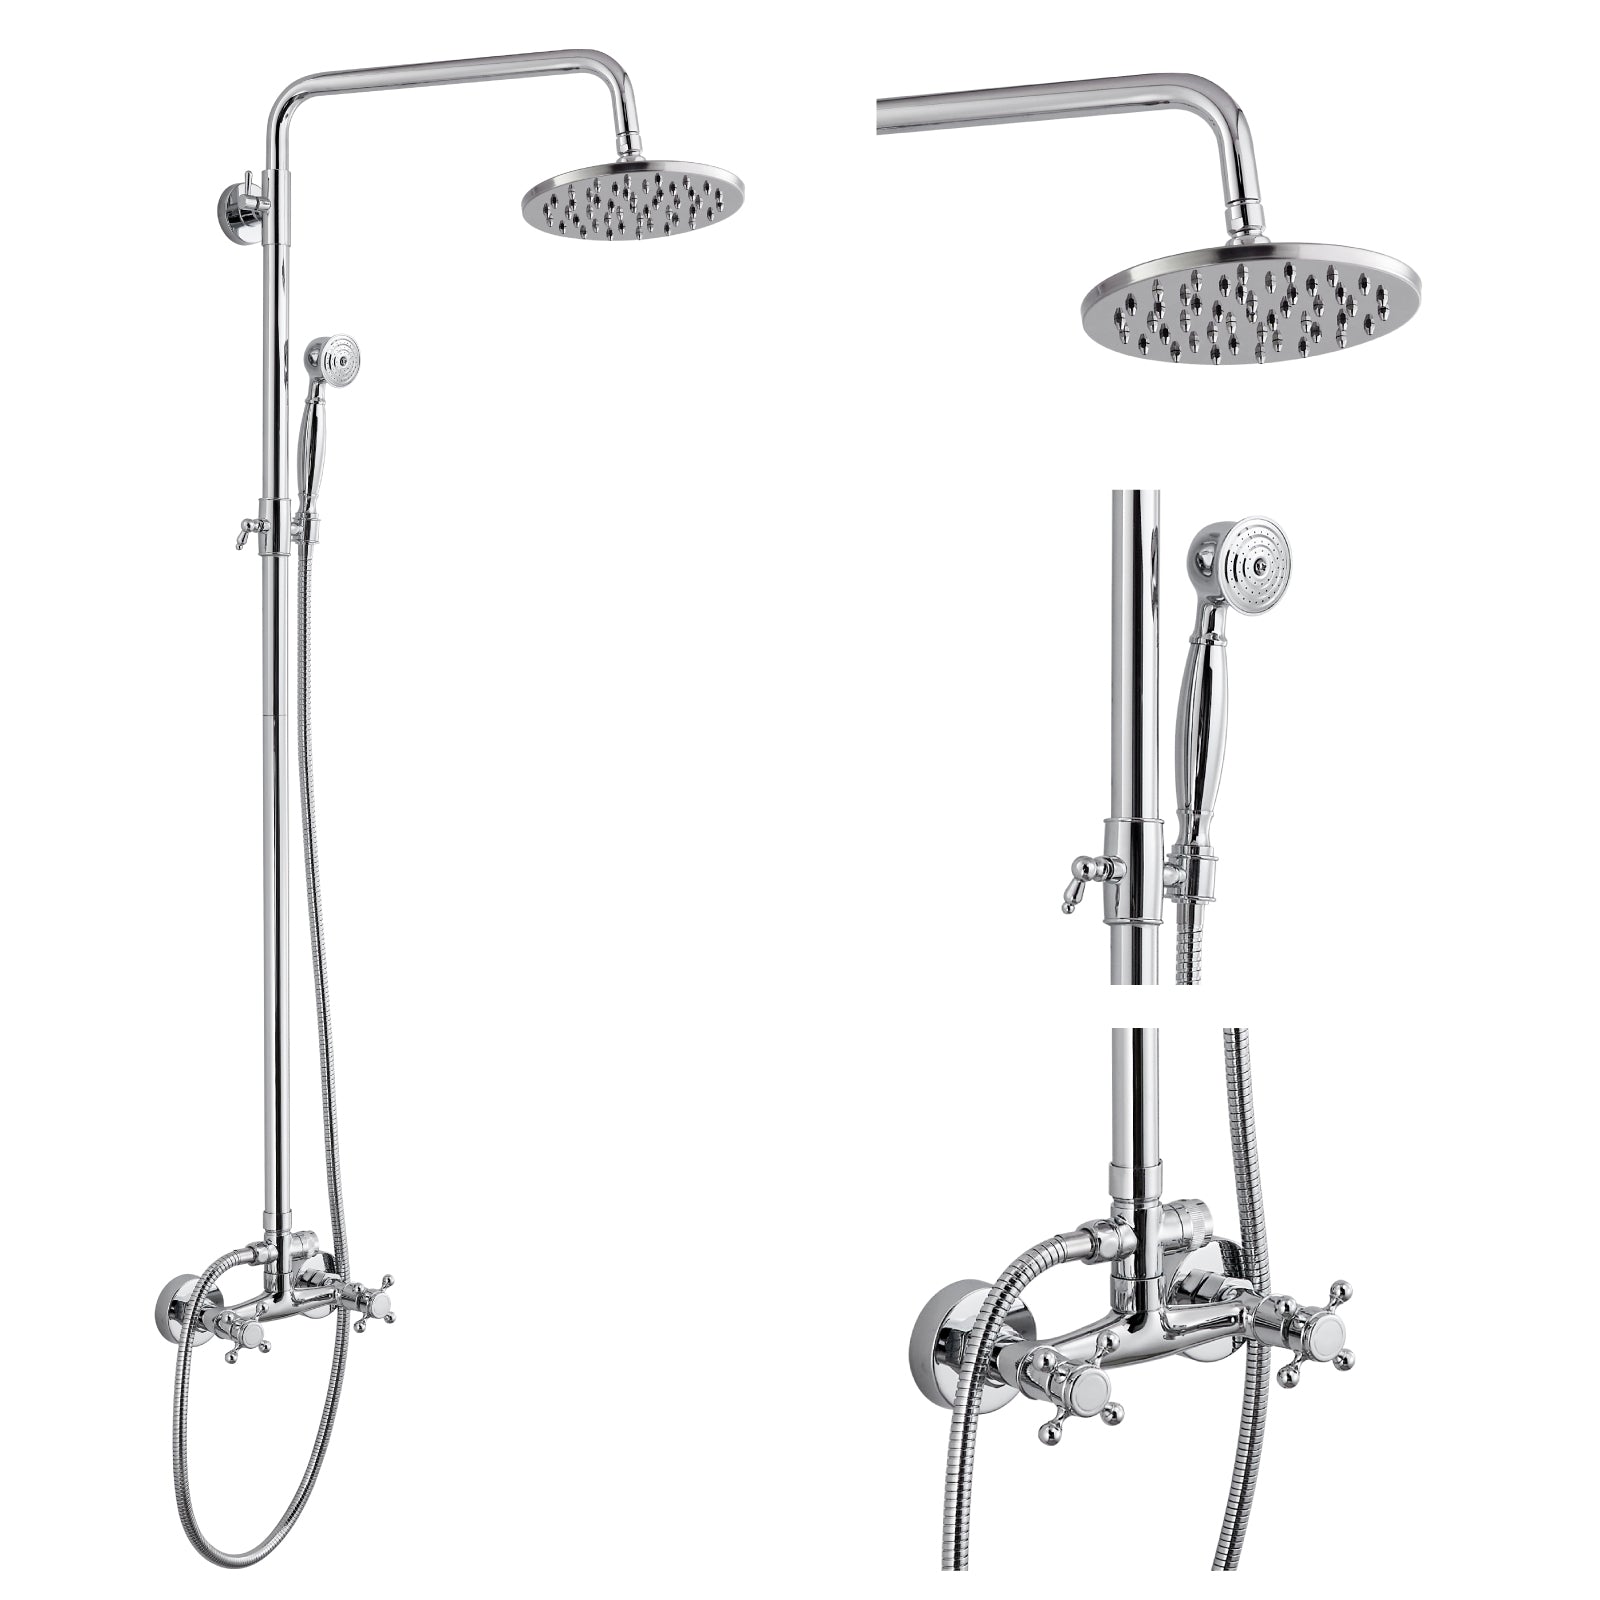 Heyalan Dual Functions Exposed Pipe Shower System Round Rainfall 8 Inch Shower Head Brass Fixture Combo Set 2 Handles with Handheld Sprayer Bathroom Shower Faucet Adjustable Shower Bar